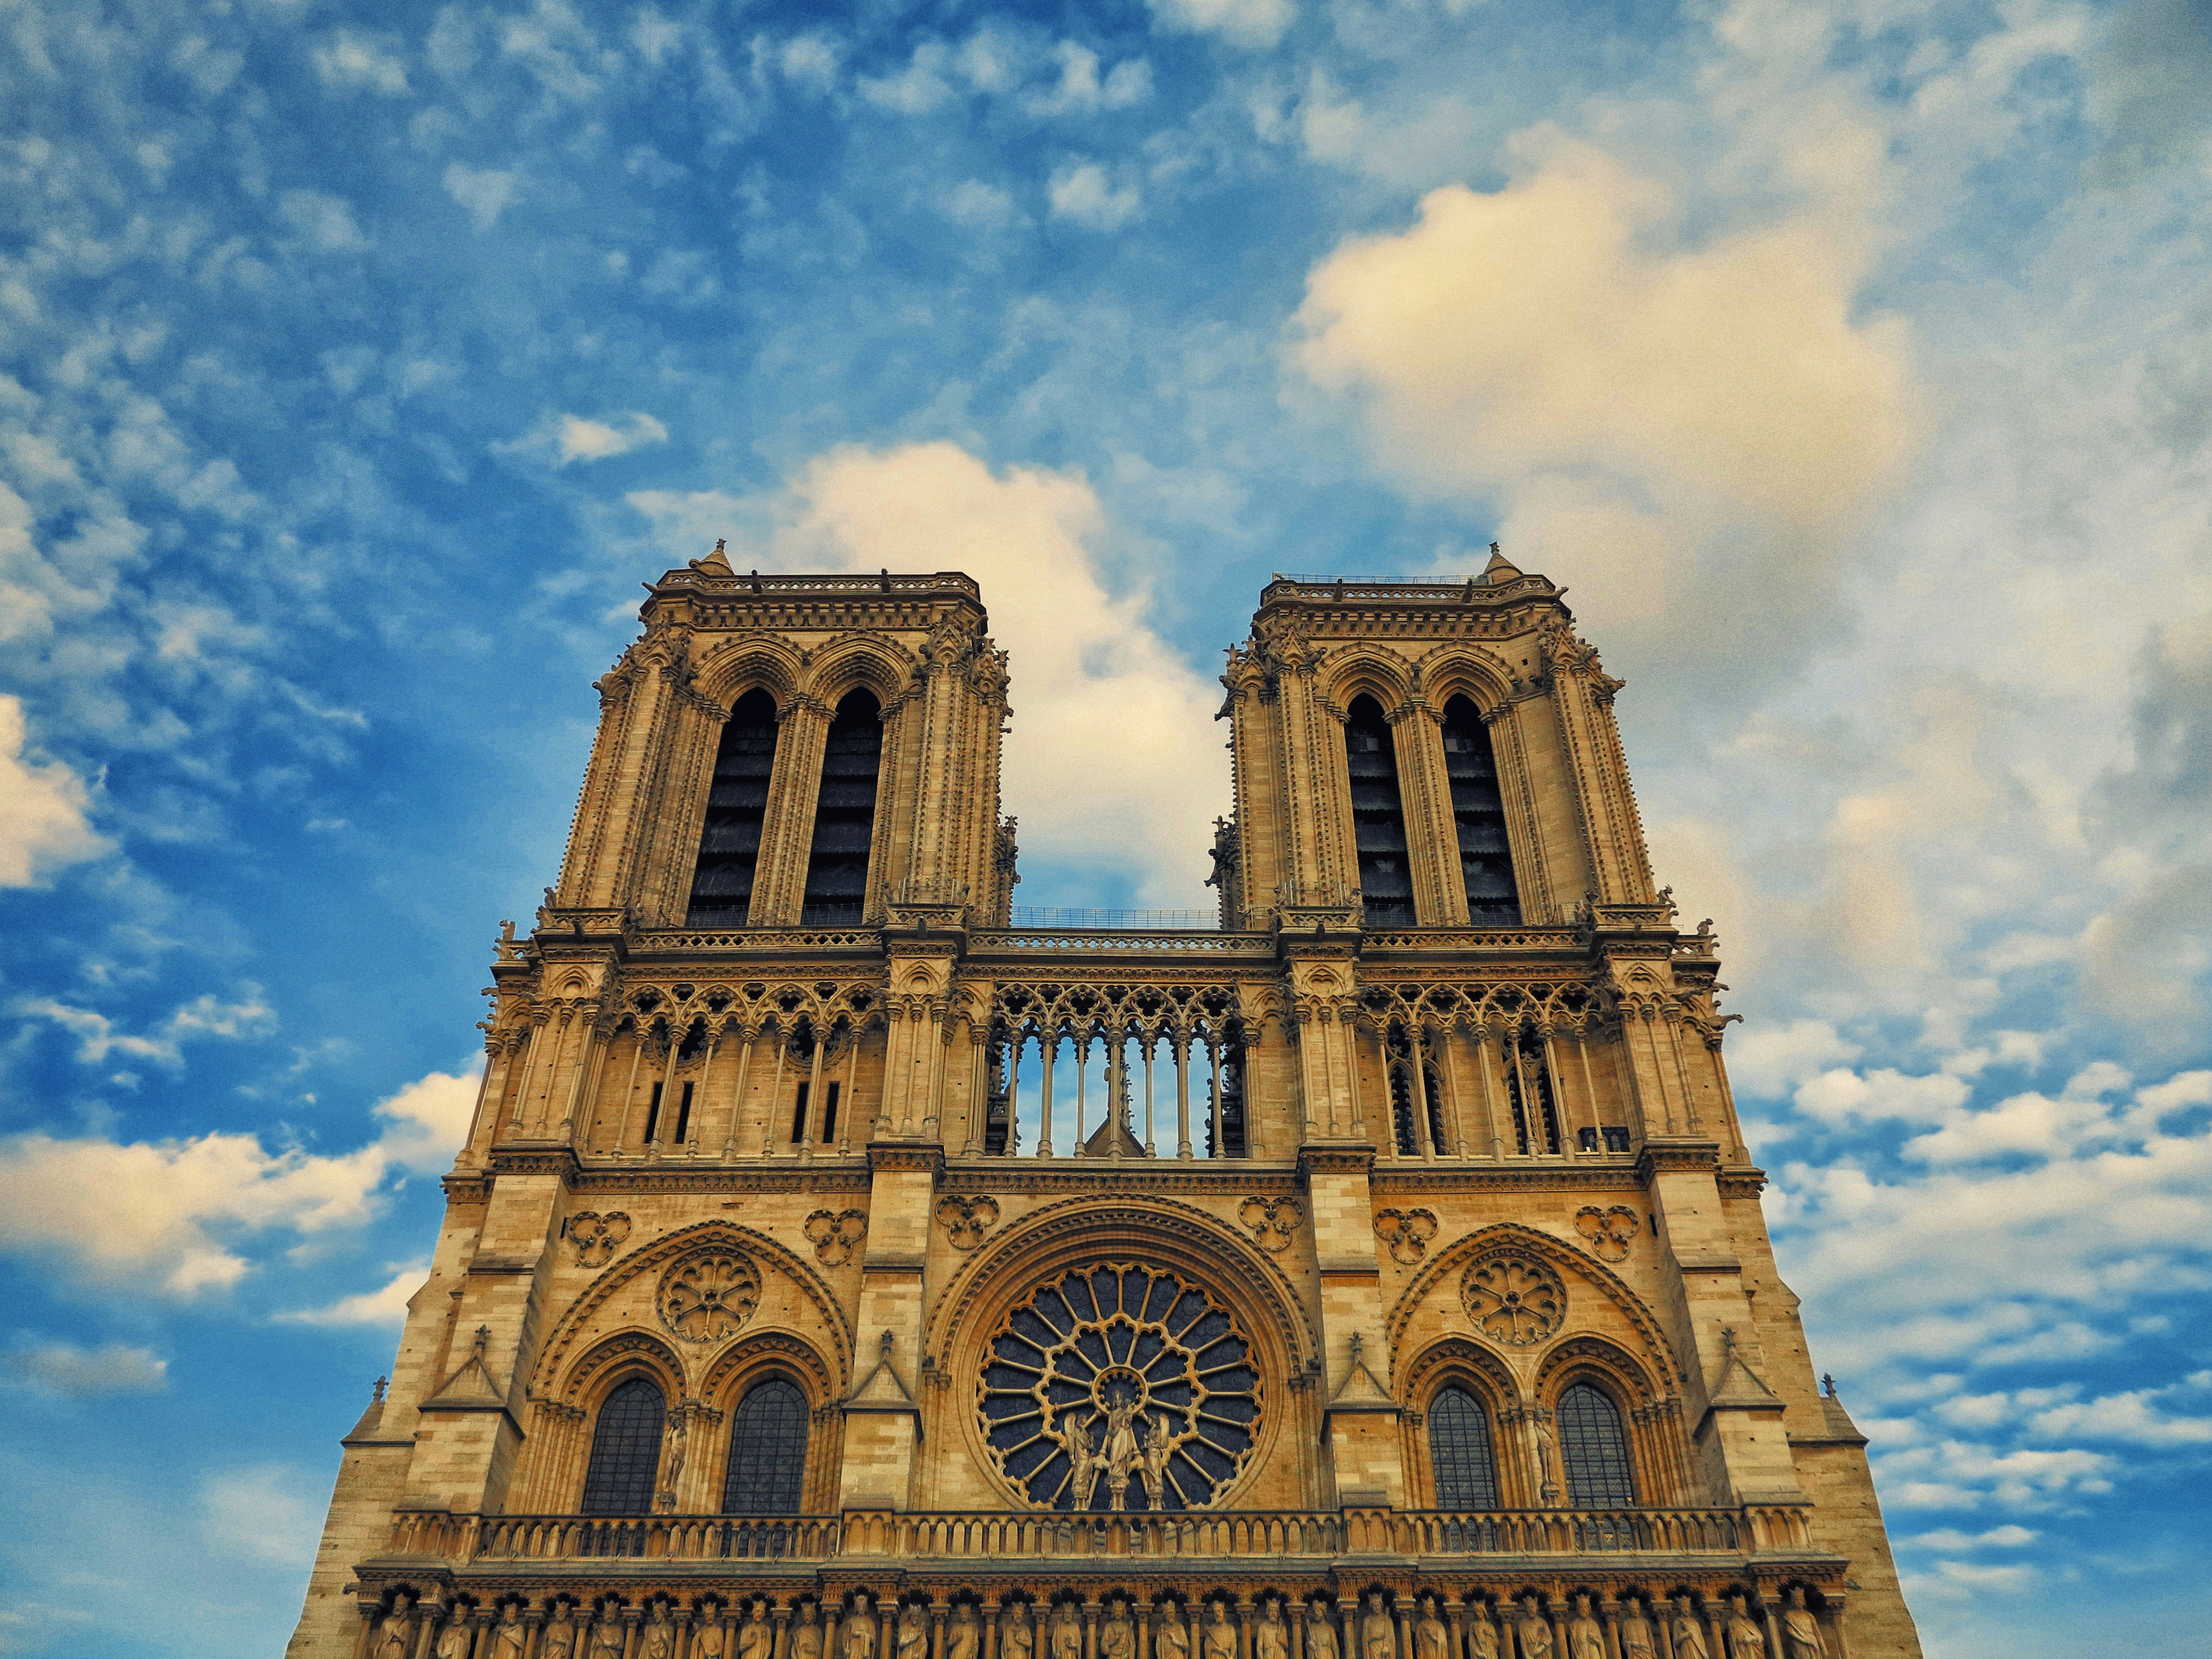 The monumental Notre Dame Cathedral in Paris, France.